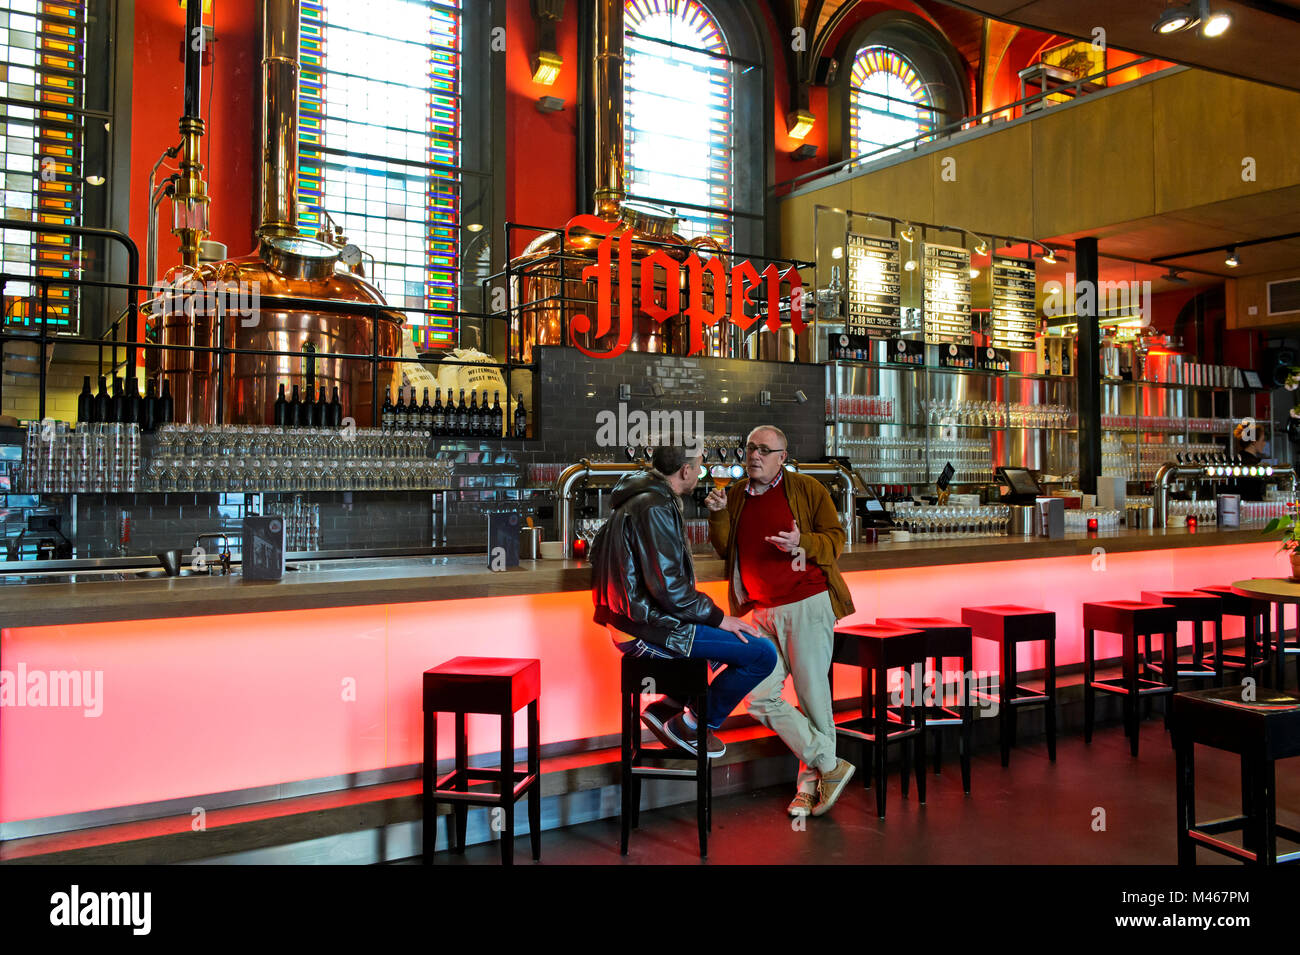 Two guests talking in the taproom of the Jopen brewery in the former church De Jopenkerk, Jopen Church, Haarlem, Netherlands Stock Photo